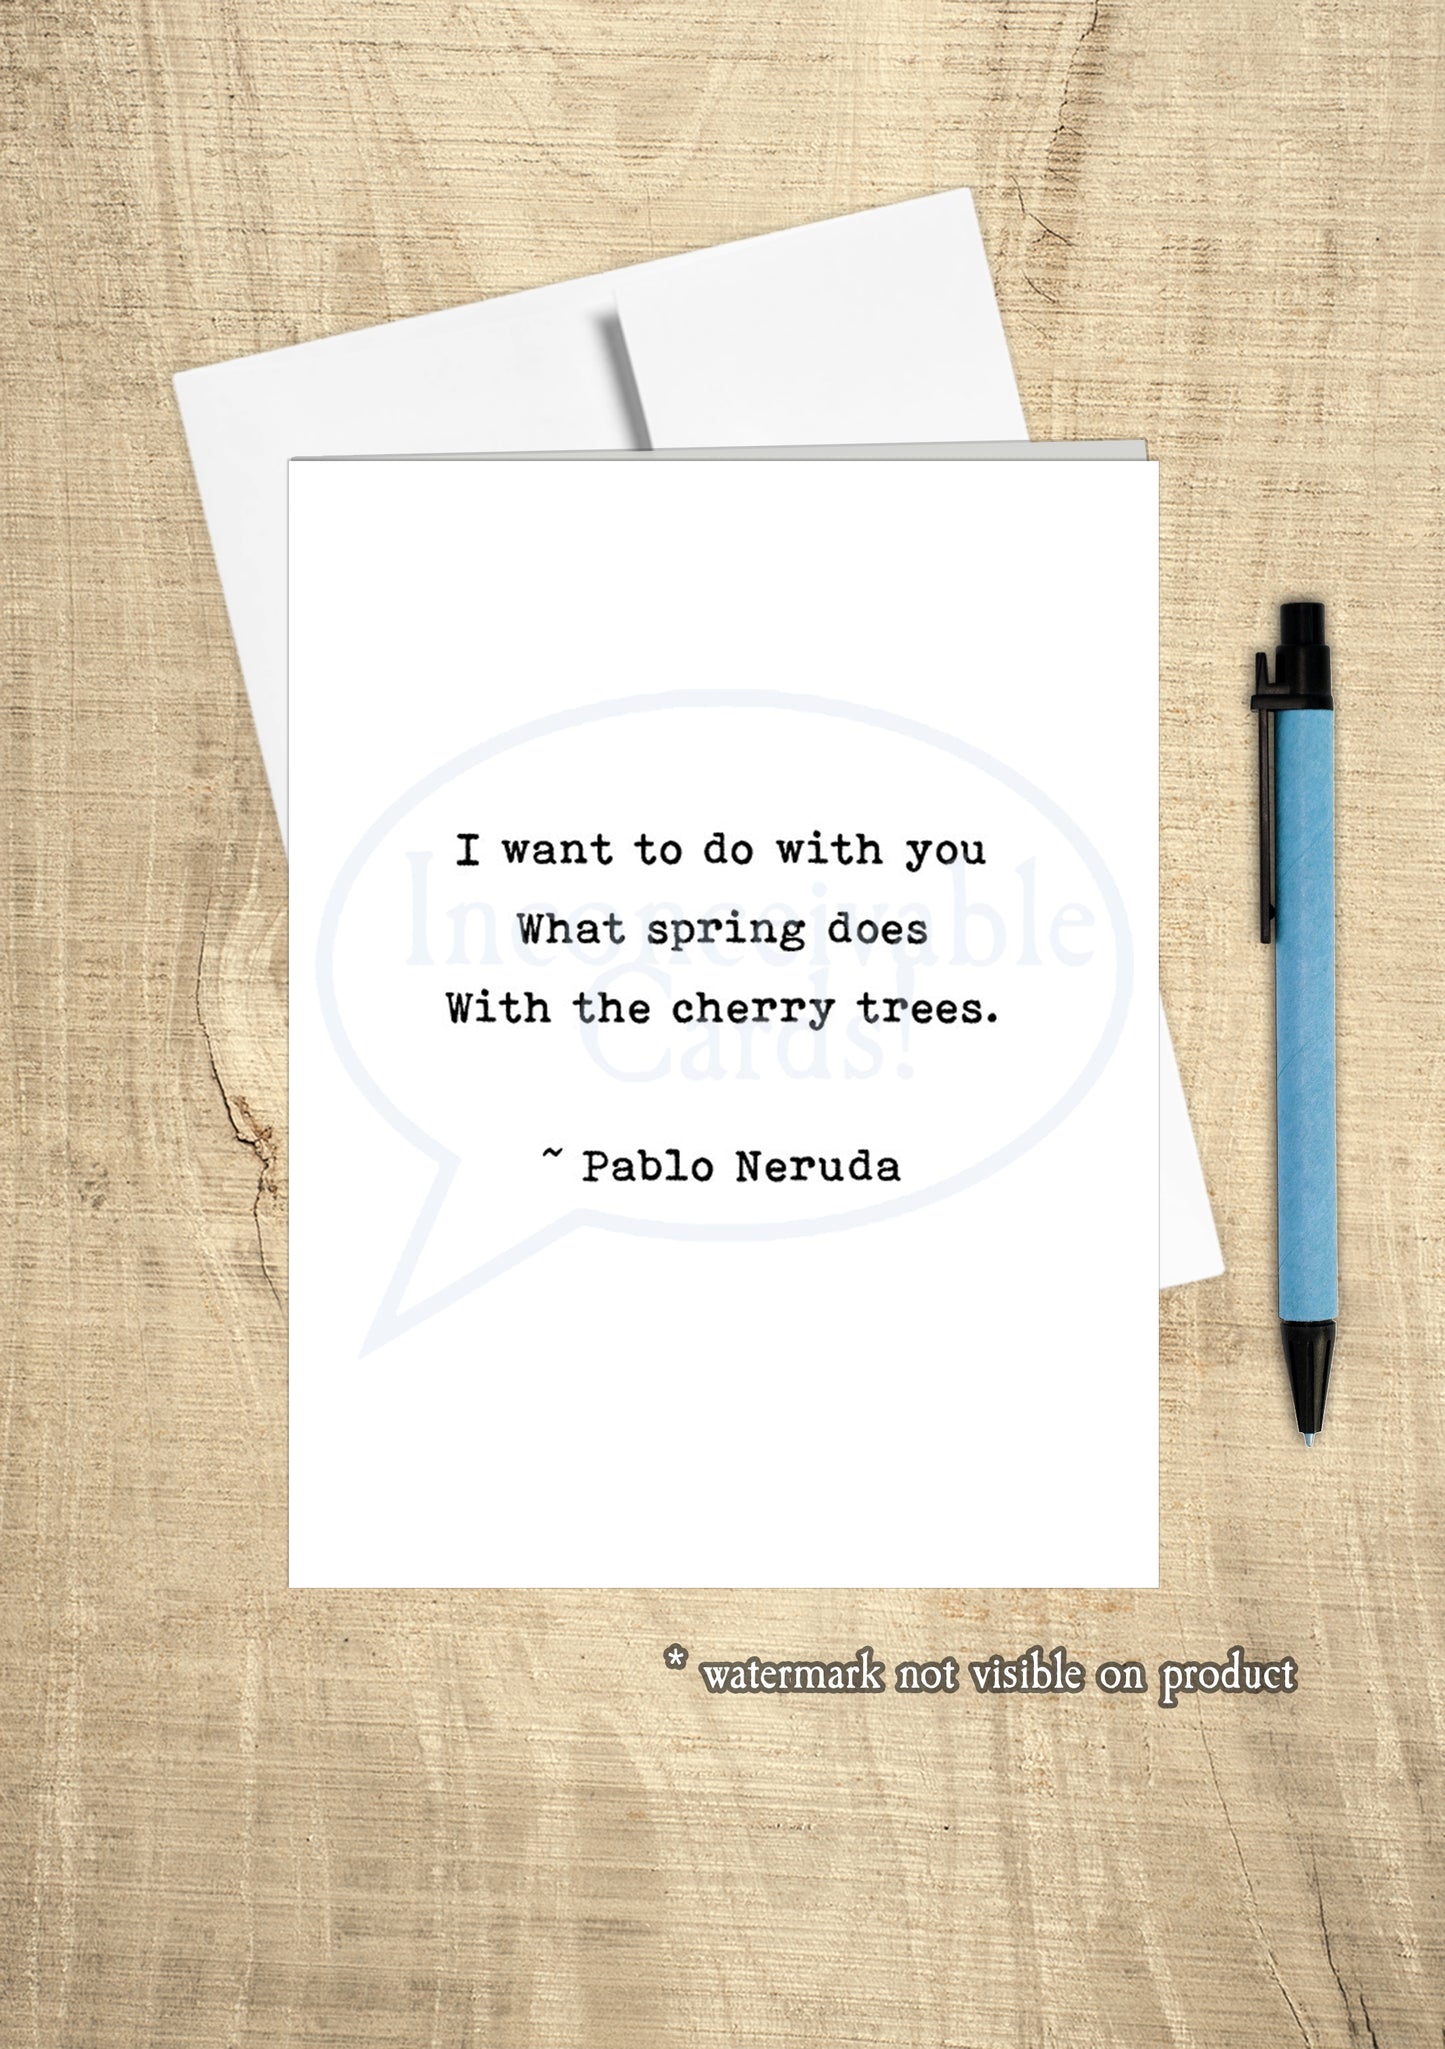 Romantic Quote - Pablo Naruda "I want to do with you what spring does" Romantic Card, Anniversary Card, Dark Humore